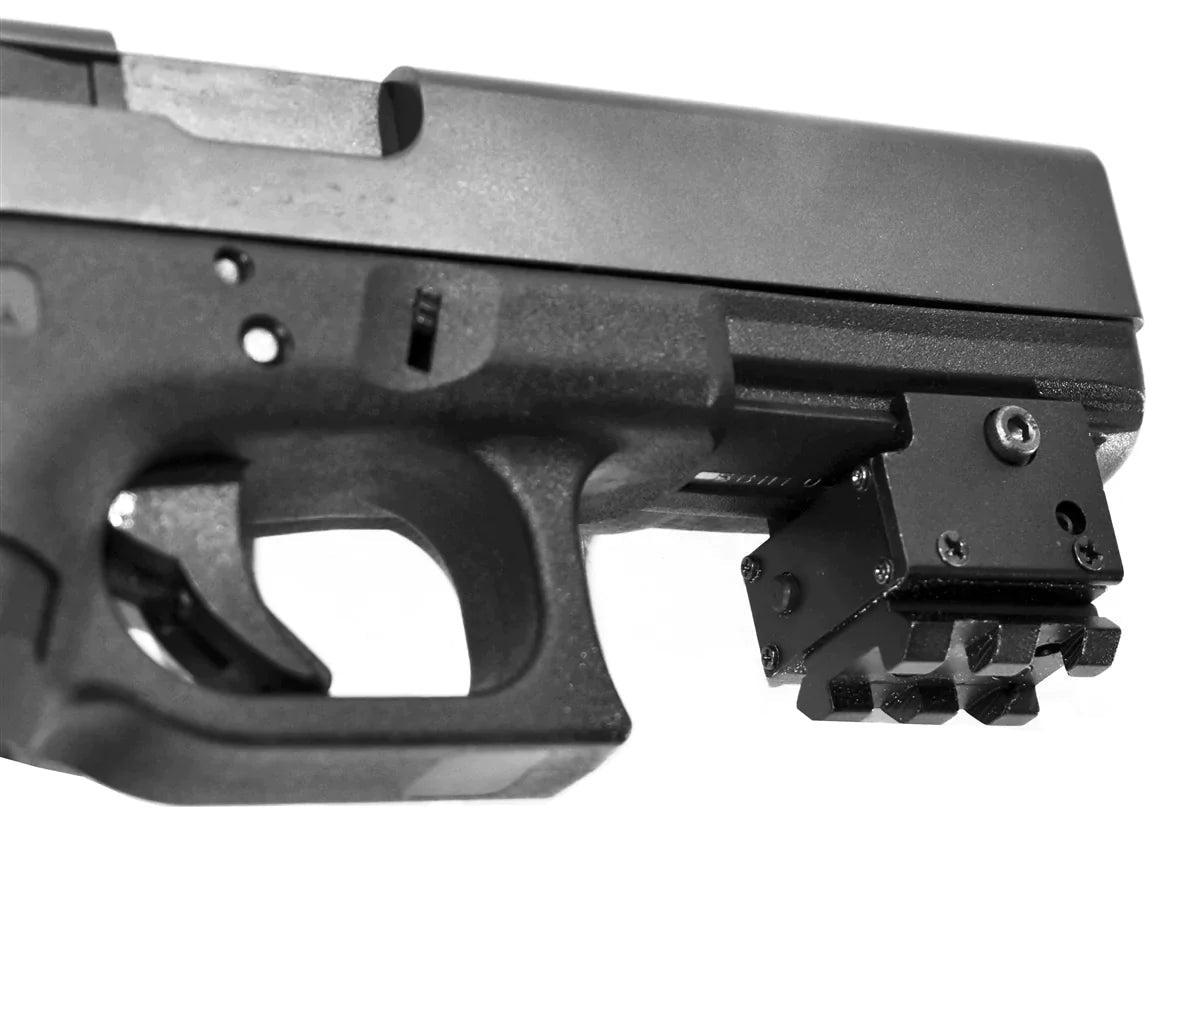 Trinity picatinny Mounted red dot laser Sight For Glock 19 Gen5 accessories home defense. - TRINITY SUPPLY INC